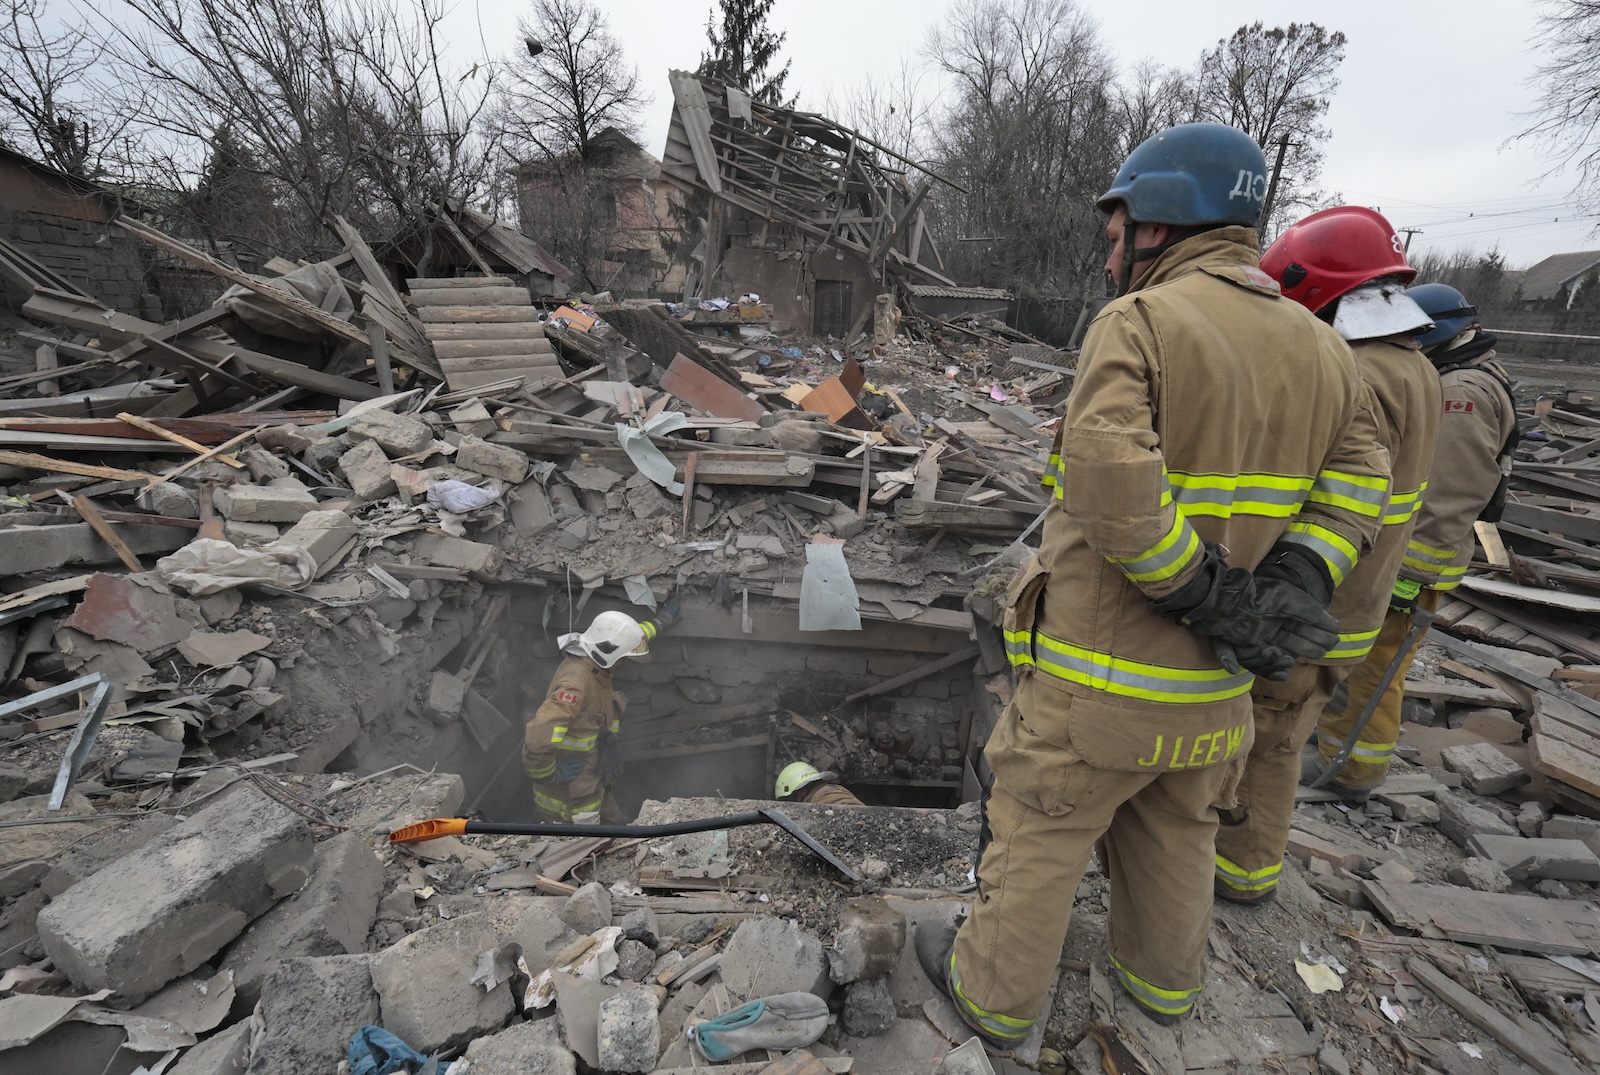 epaselect epa11048118 Ukrainian rescuers work among the rubble of a private building after shelling in Zaporizhzhia, southeastern Ukraine, 29 December 2023, amid the Russian invasion. At least 18 people have died and over 130 were injured after Russia launched a wave of airstrikes across Ukraine, Ukraine's Ministry of Internal Affairs said on 29 December. Strikes were reported in Kyiv, Lviv, Odesa, Dnipro, Kharkiv, Zaporizhzhia, and other Ukrainian cities. Russia launched 'more than 150 missiles and combat drones' at Ukrainian cities, Ukraine's Prosecutor General Andriy Kostin said in a statement, adding that extensive damage included residential buildings, educational institutions and hospitals. Russian troops entered Ukraine on 24 February 2022 starting a conflict that has provoked destruction and a humanitarian crisis.  EPA/KATERYNA KLOCHKO